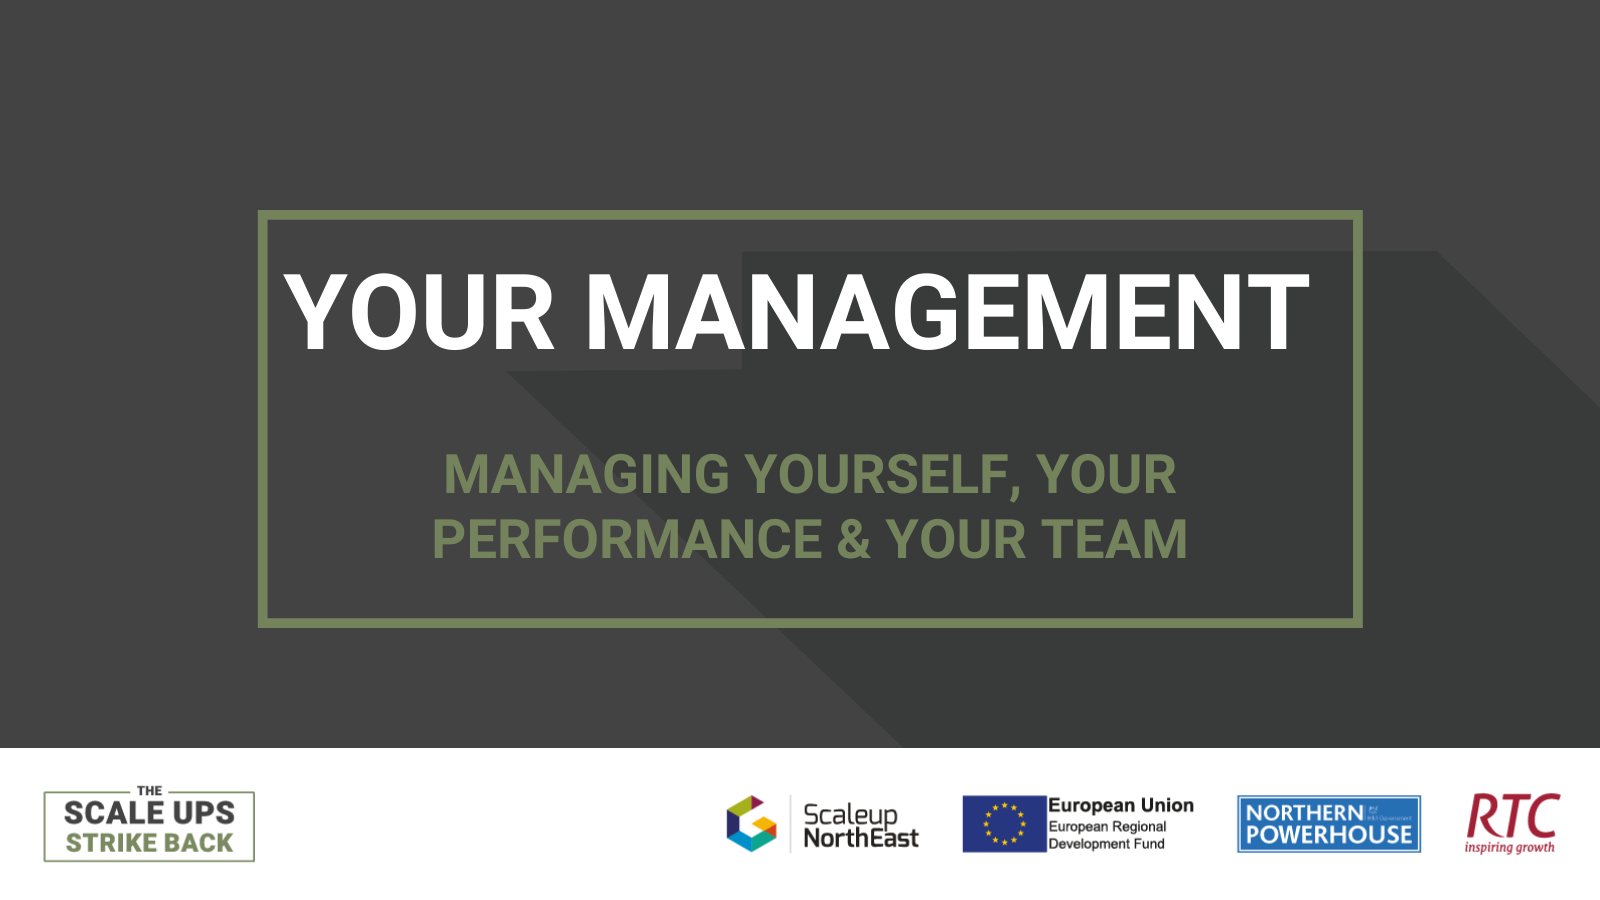 Your Management - Managing Yourself, Your Performance & Your Team